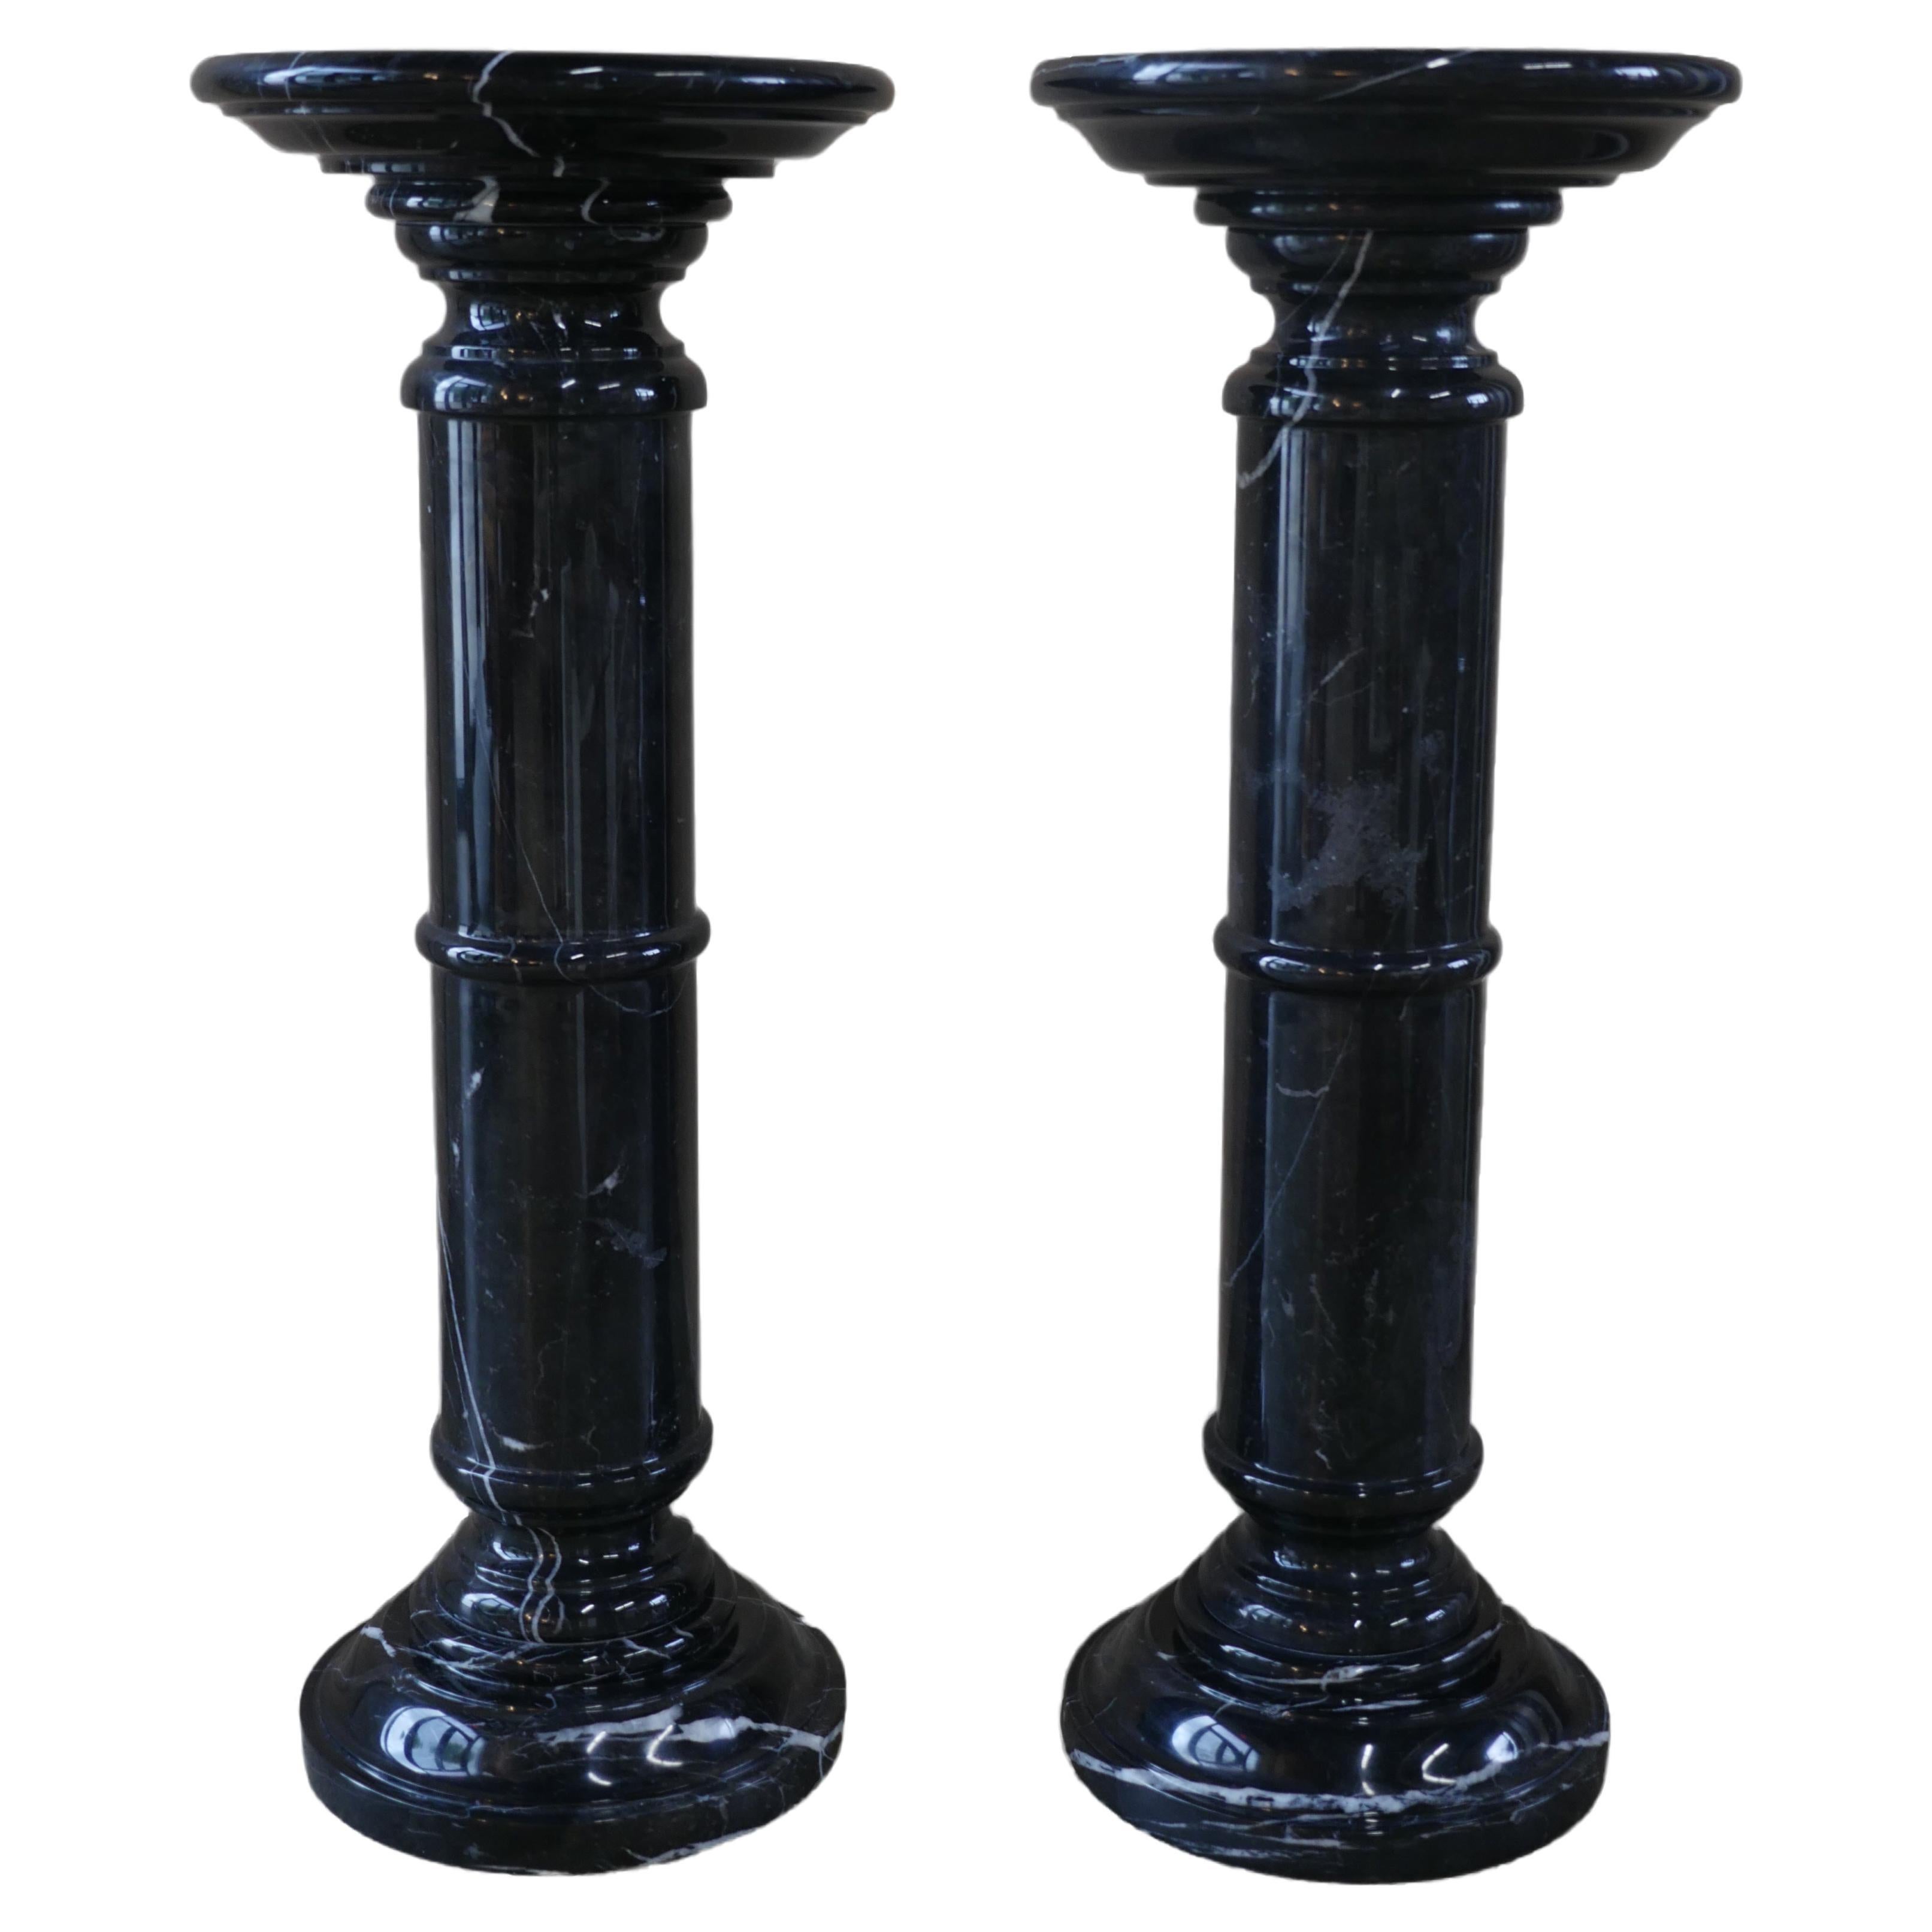 1970s Polished Nero Marquina Solid Marble Pedestals - Set of 2 For Sale